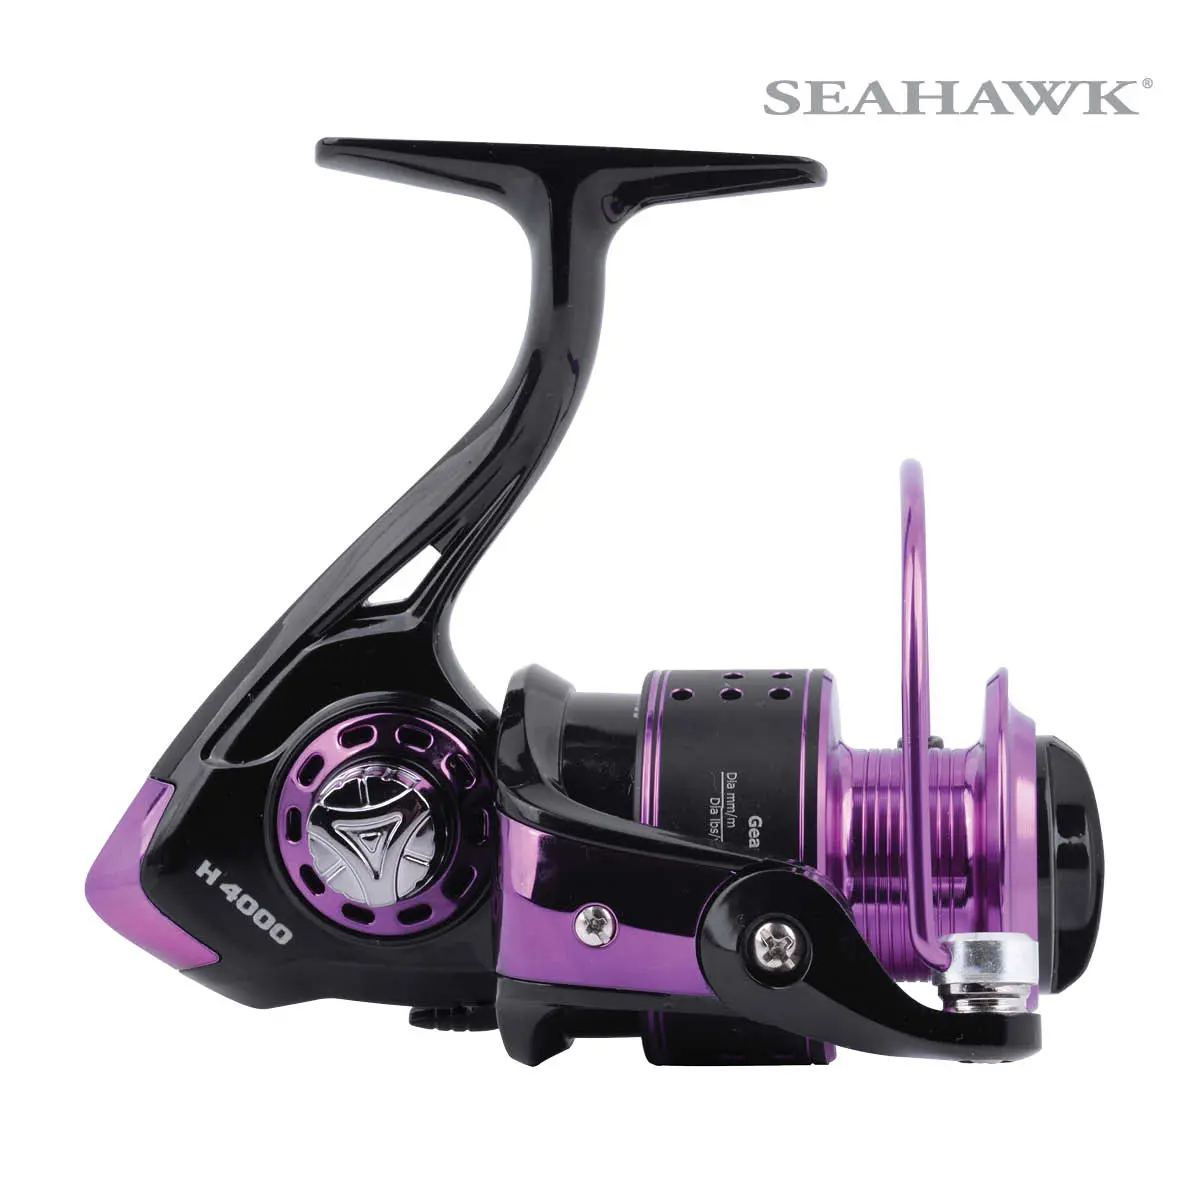 Seahawk Catfish Rods and Garcia Baitcaster Spinning on Sale Spool Reels -  China Seahawk Reel and Catfish Rods and Reels price